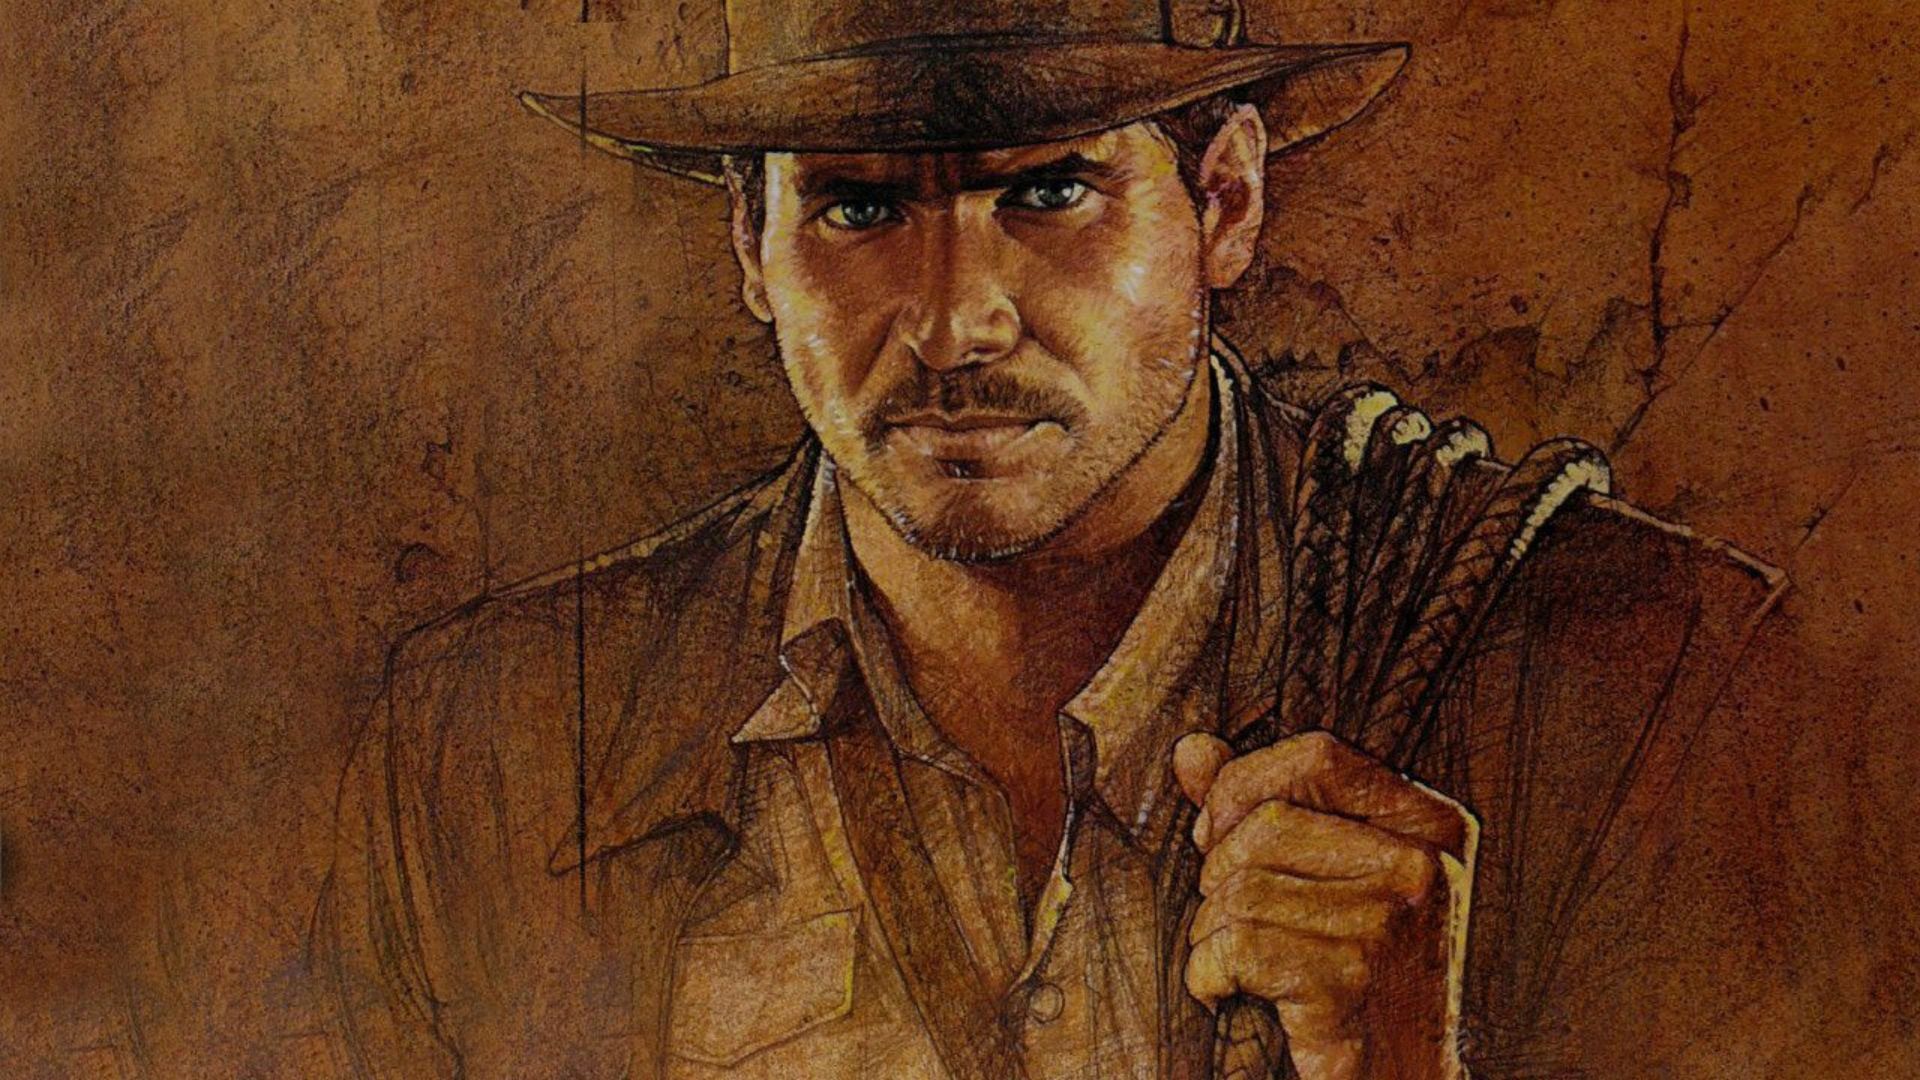 Raiders of the Lost Ark background